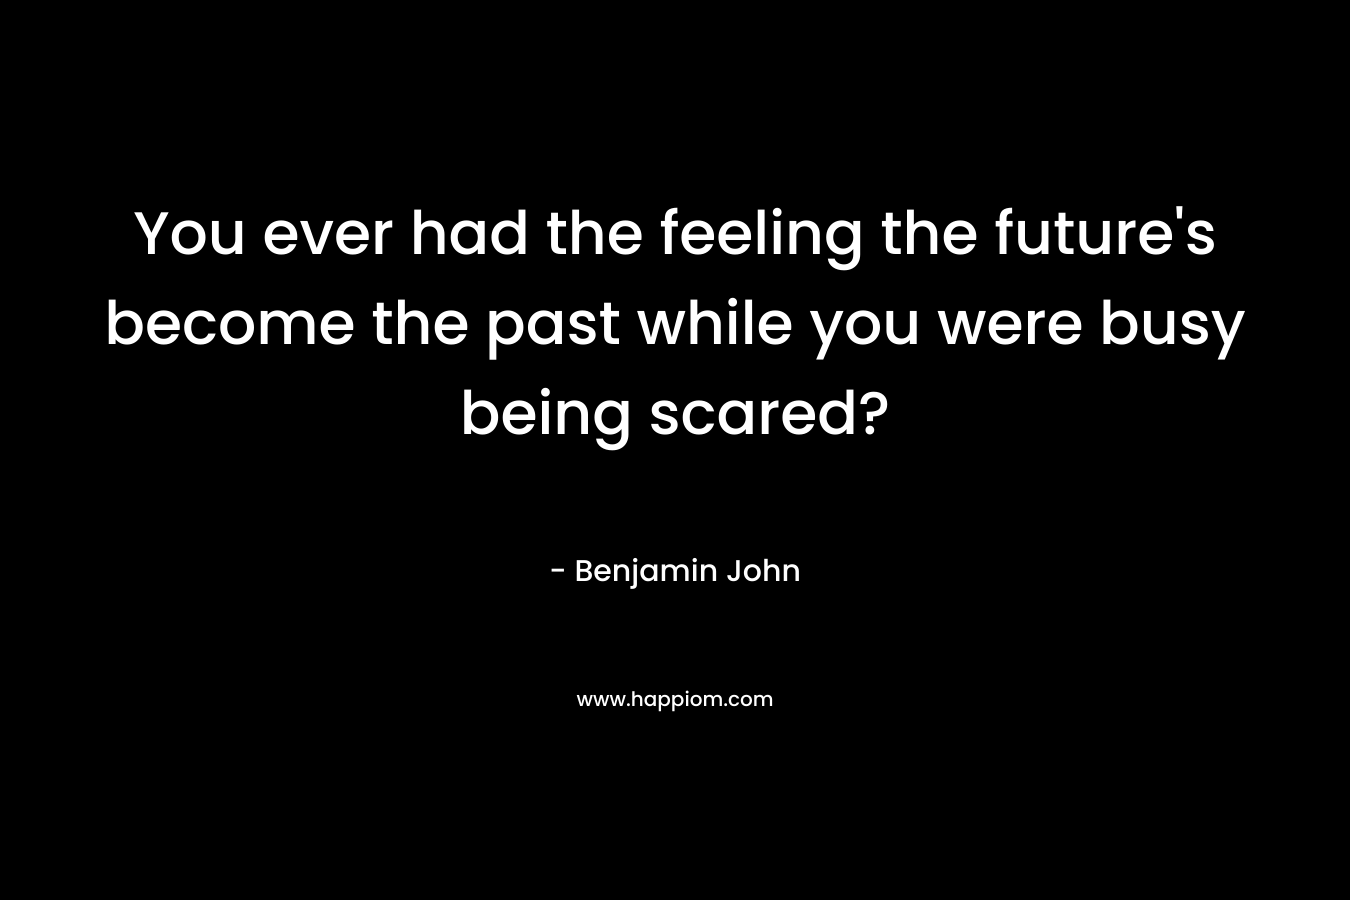 You ever had the feeling the future’s become the past while you were busy being scared? – Benjamin John